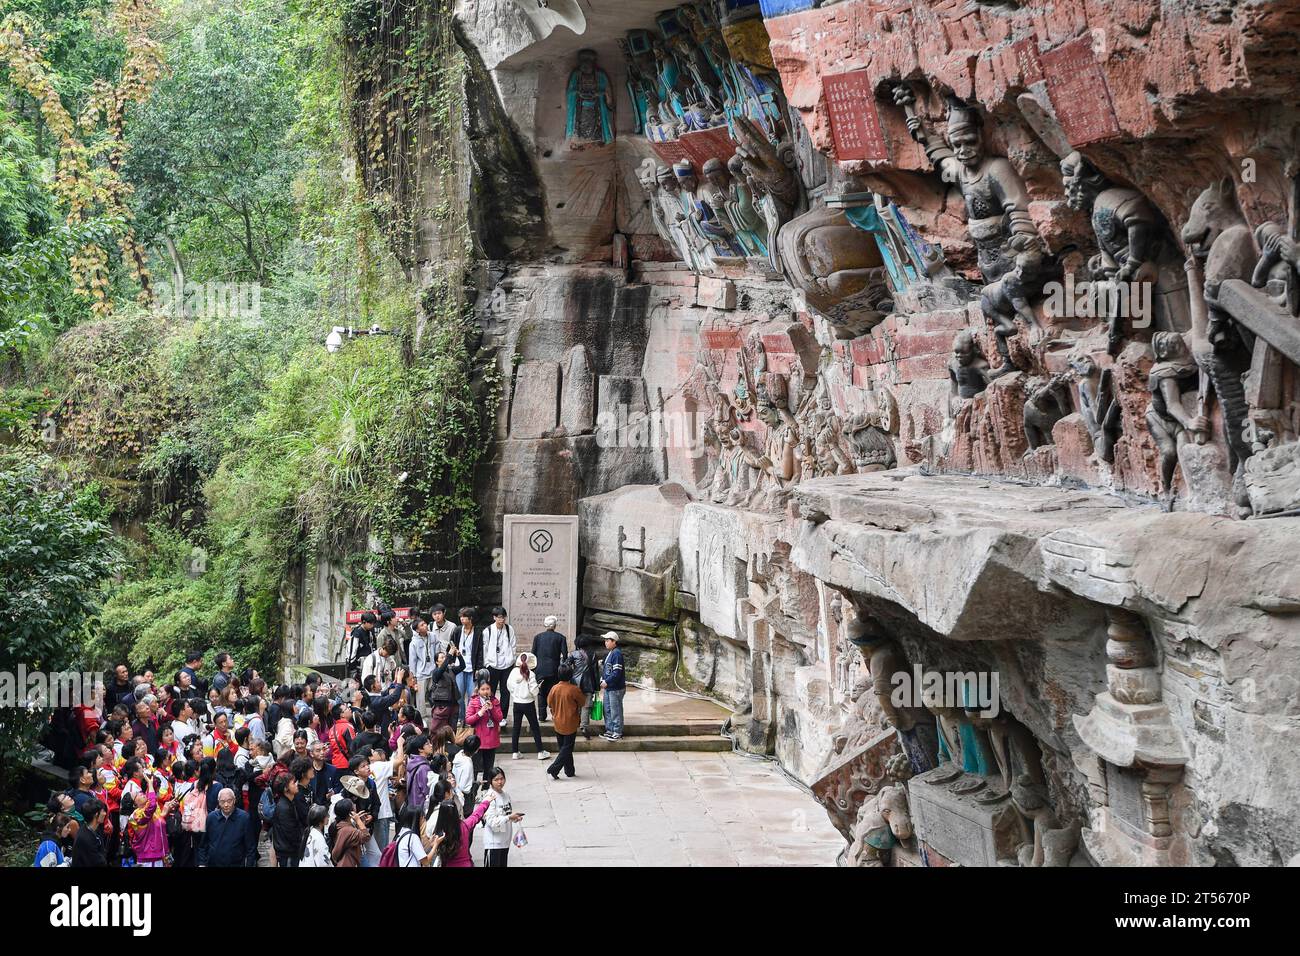 (231103) -- CHONGQING, Nov. 3, 2023 (Xinhua) -- People visit the scenic spot of Dazu Rock Carvings in Chongqing, southwest China, Nov. 1, 2023. The scenic spot of Dazu Rock Carvings saw about one million tourist trips made from January to October this year, up 358.7 percent year on year.    The Dazu Rock Carvings were placed on the World Heritage List by the United Nations Educational, Scientific and Cultural Organization (UNESCO) in 1999. (Xinhua/Wang Quanchao) Stock Photo